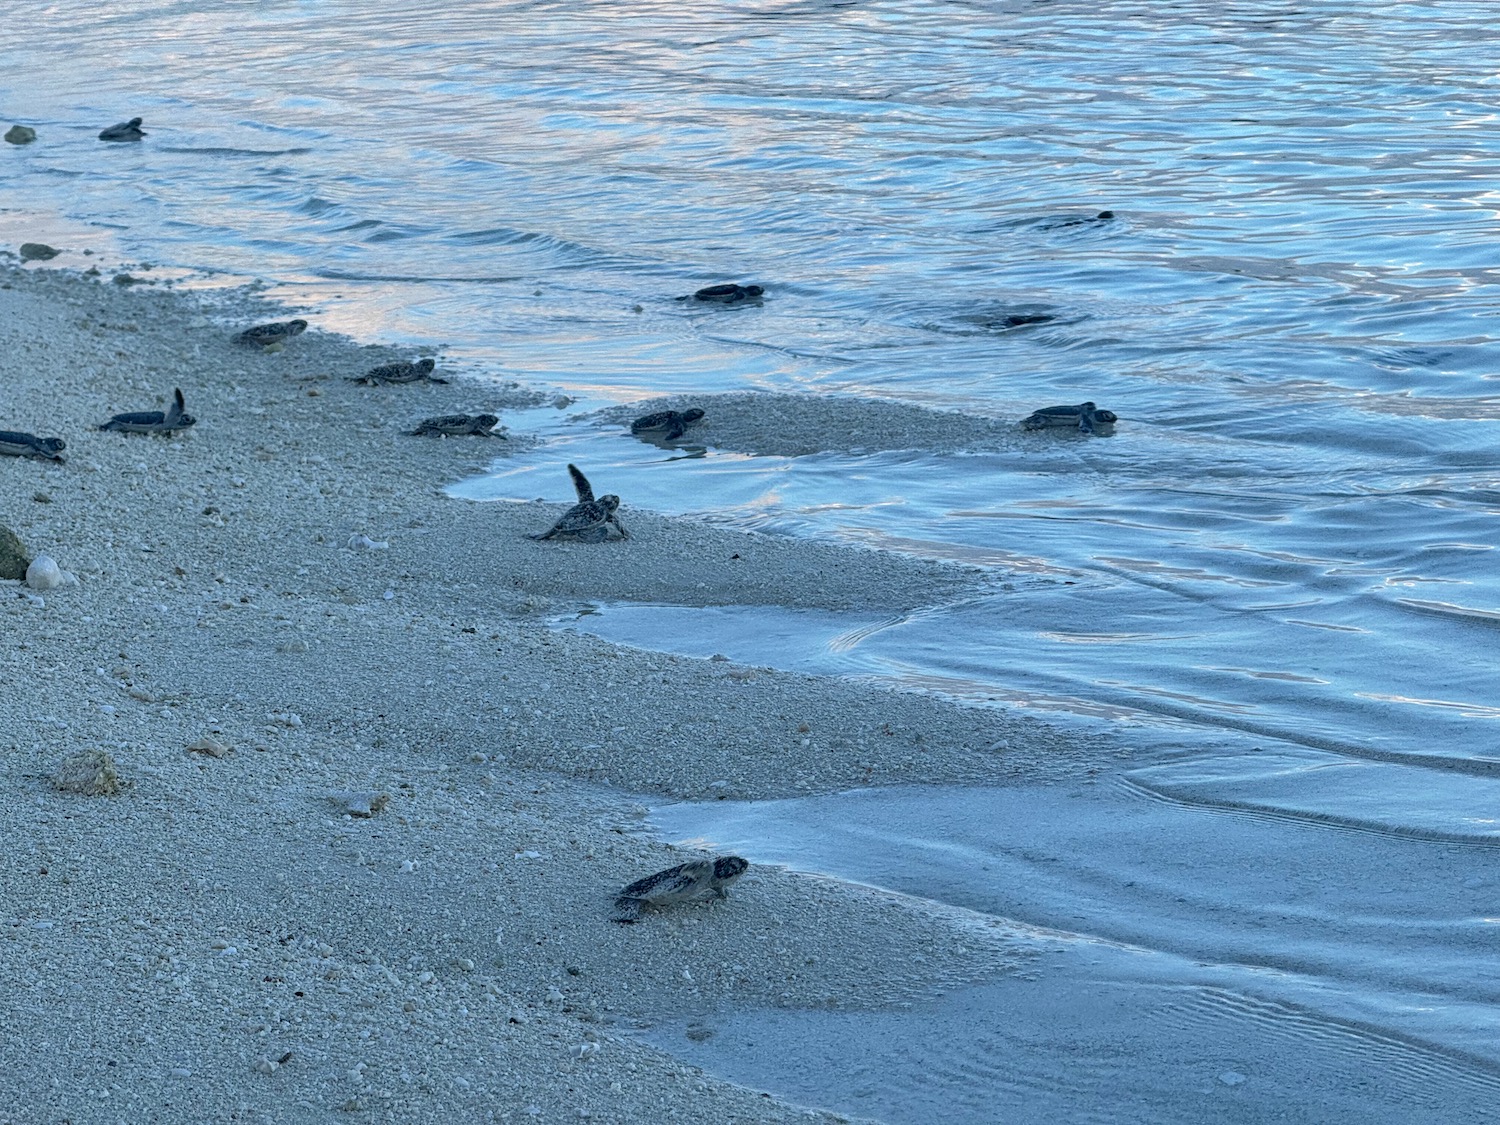 a group of baby turtles on a beach